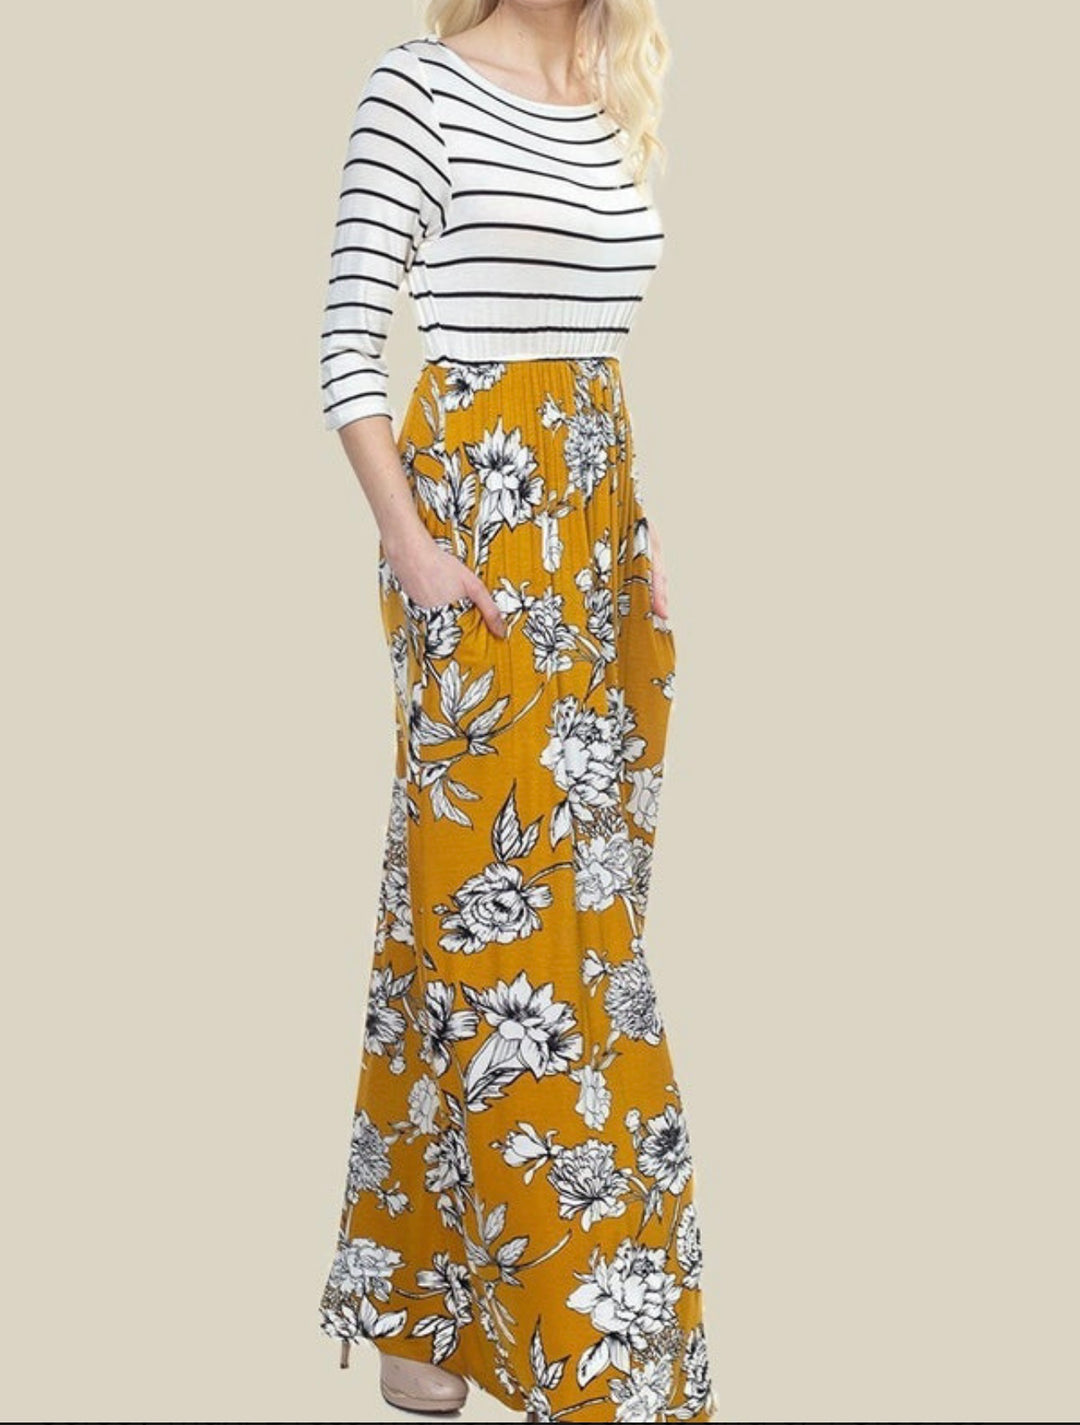 Bayleigh Striped and Floral Printed Jersey Maxi Dress